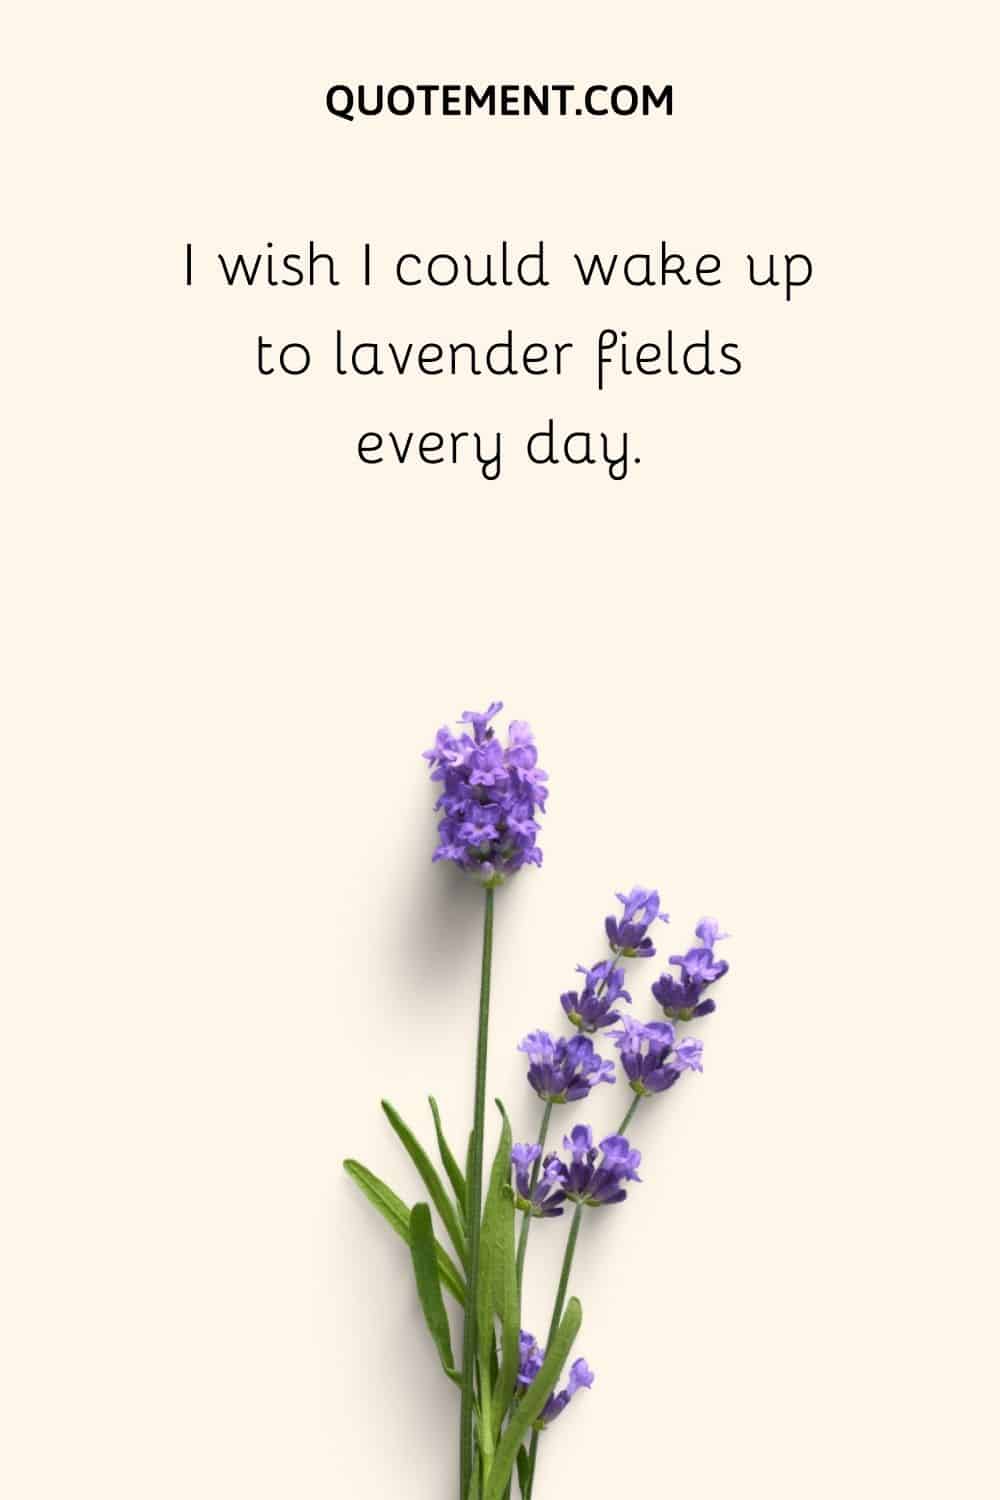 I wish I could wake up to lavender fields every day